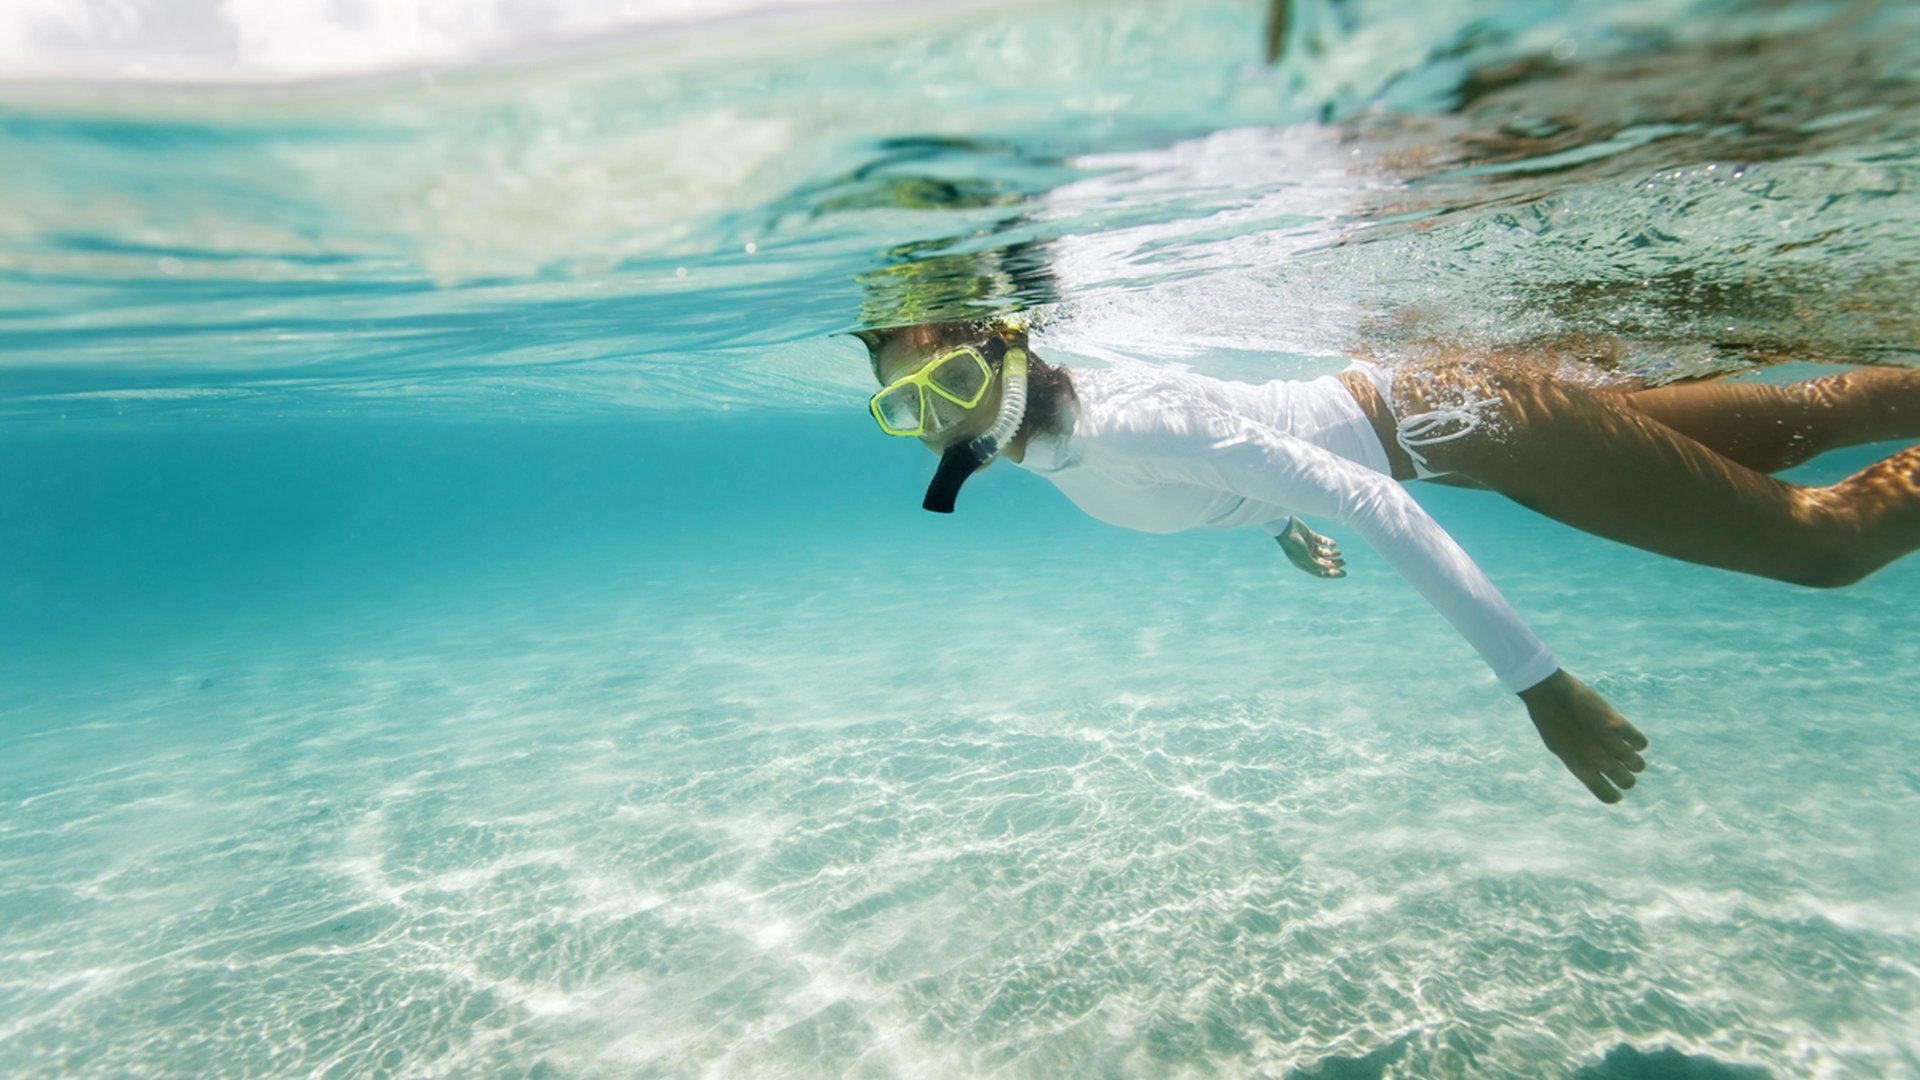 1 FREE adult ticket per day for snorkeling seasonal